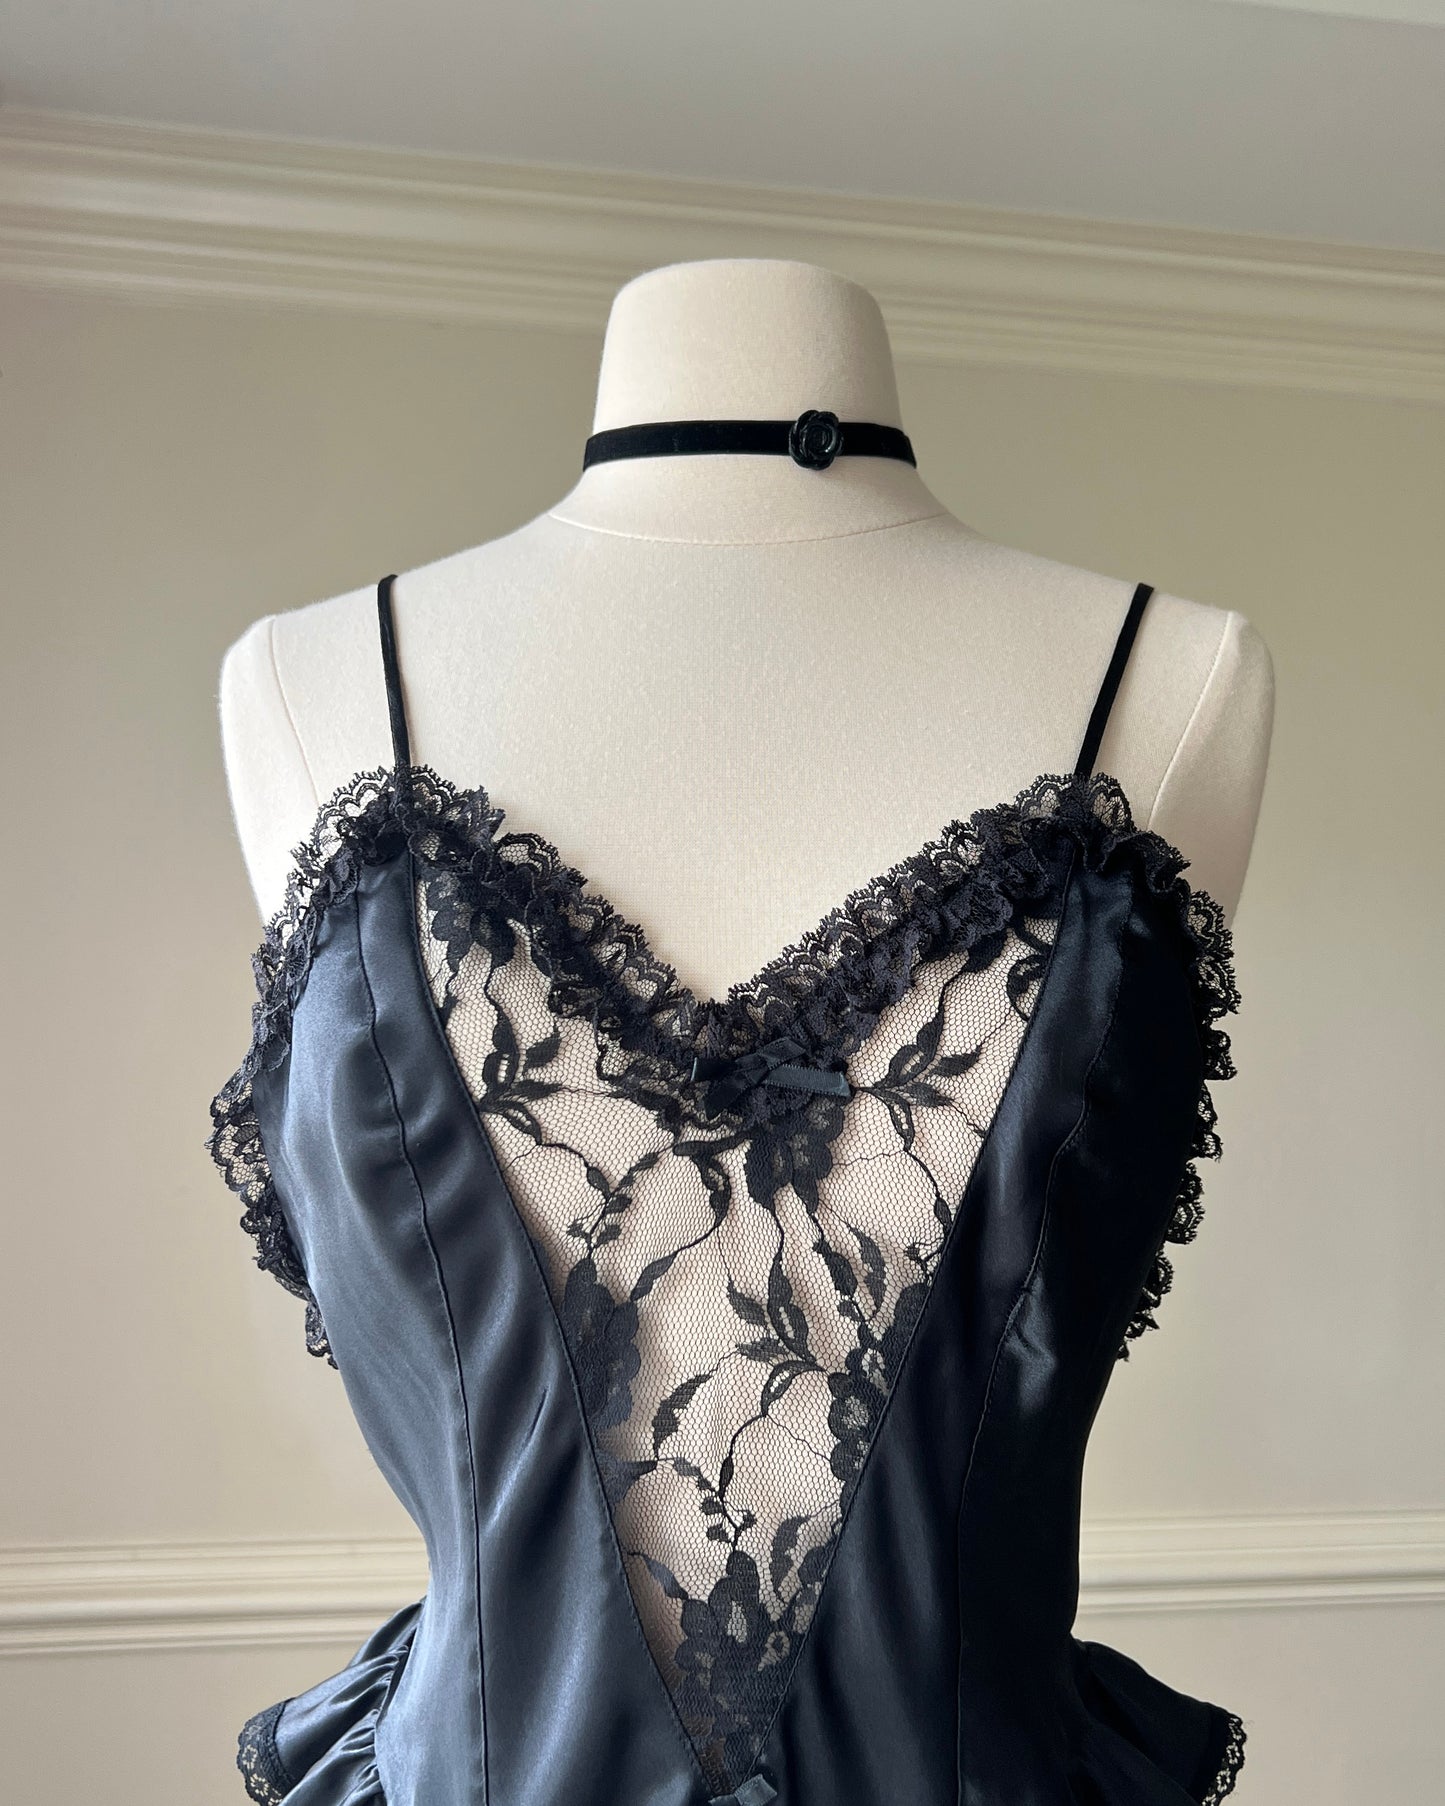 Sexy Delicate's Bodysuit featuring Laced Bodice Cutout with Floral Embroidery